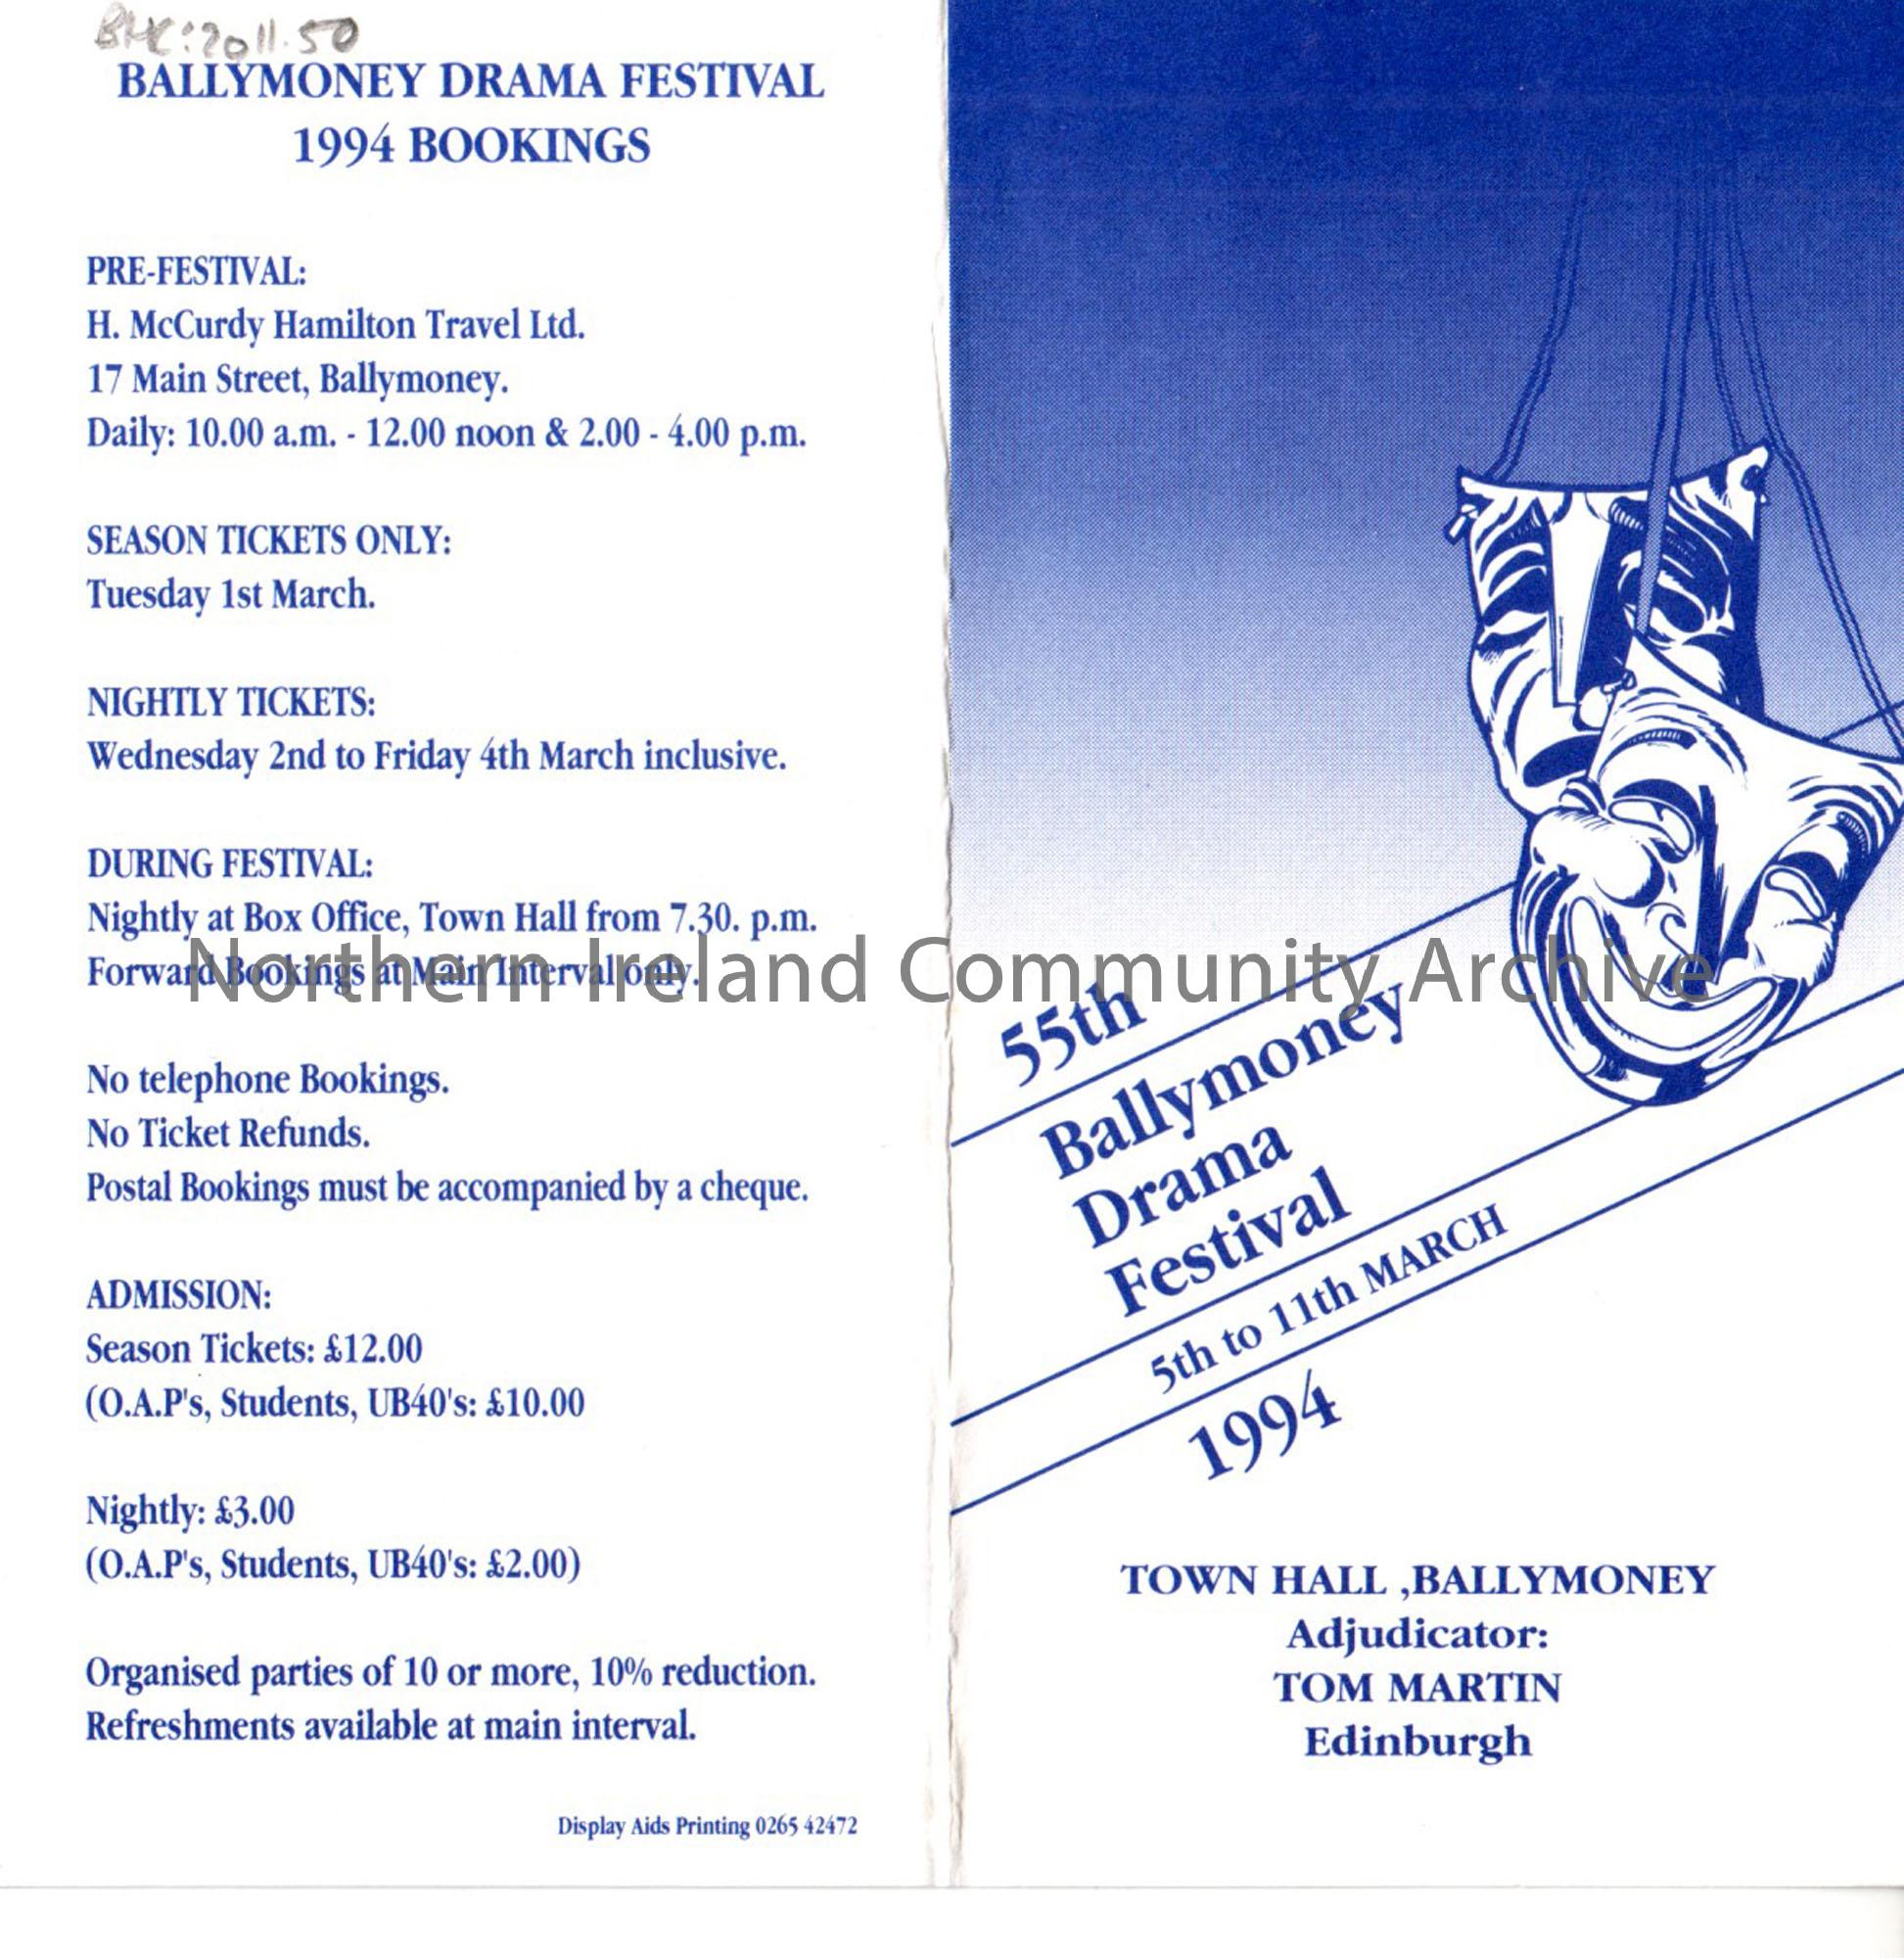 flier for the 55th Ballymoney Drama Festival 5th to 11th March 1994